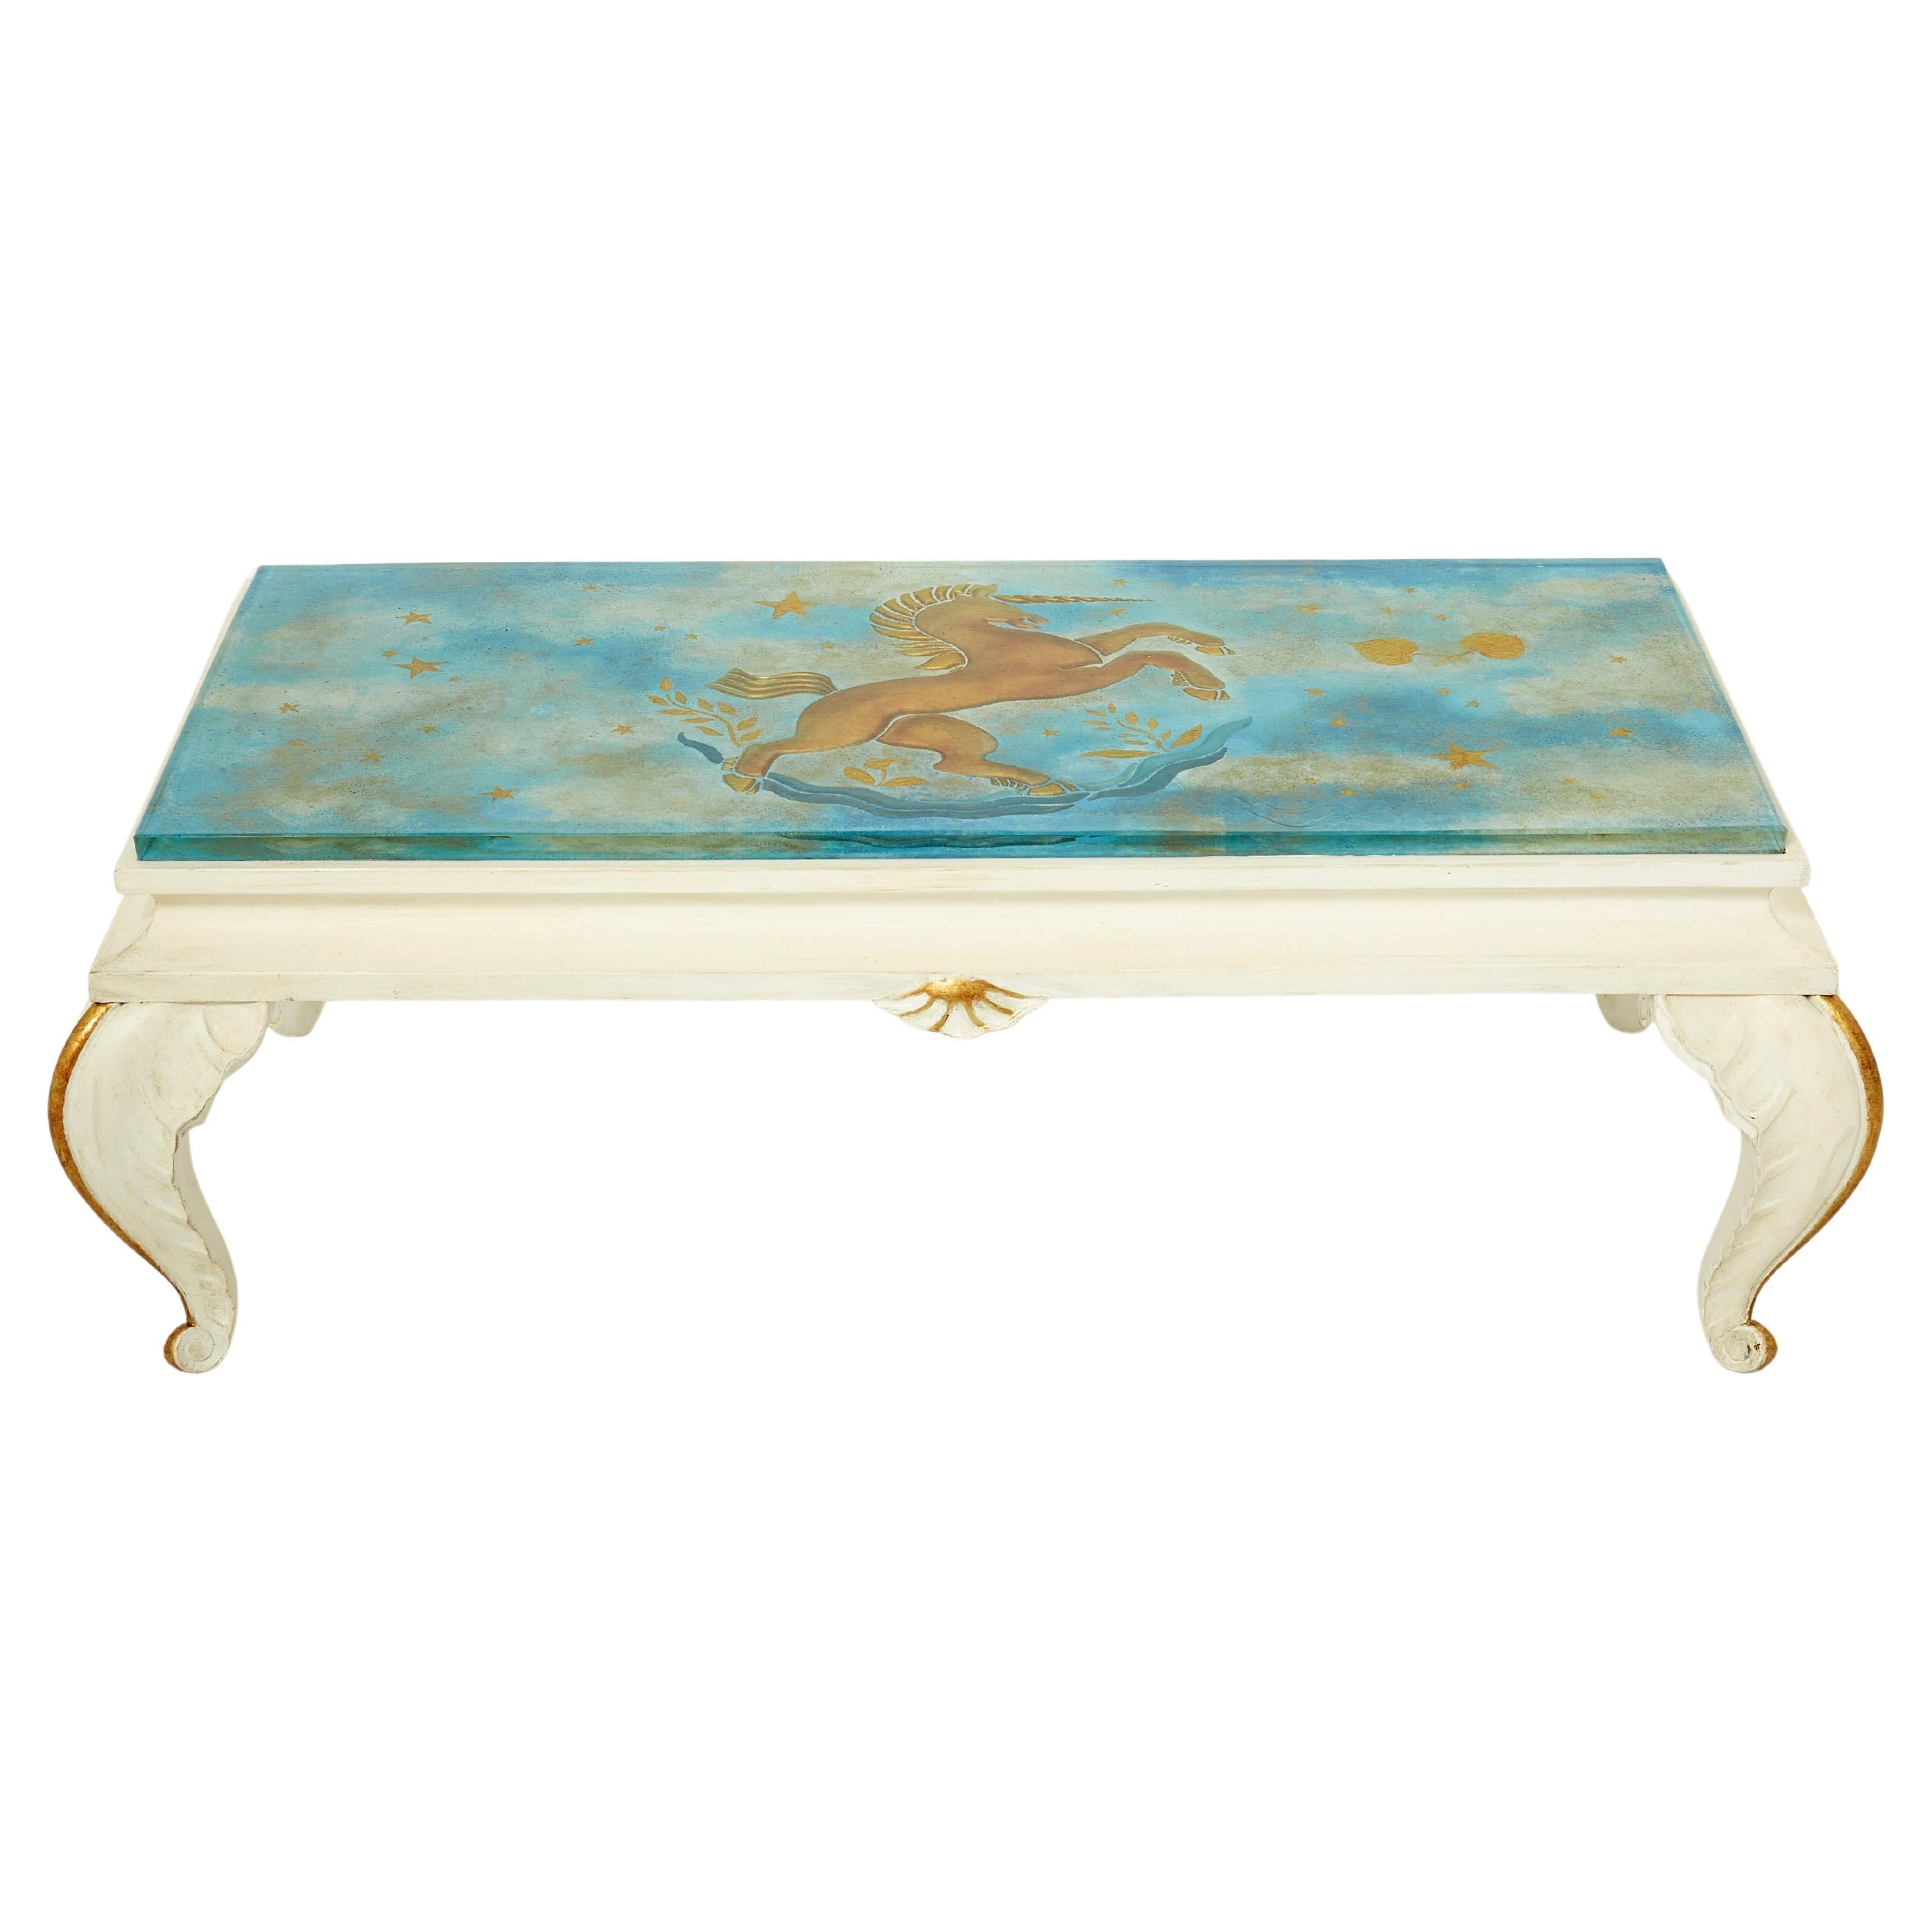 Maison Jansen Gilded Wood Painted Glass Top Coffee Table, 1950 For Sale